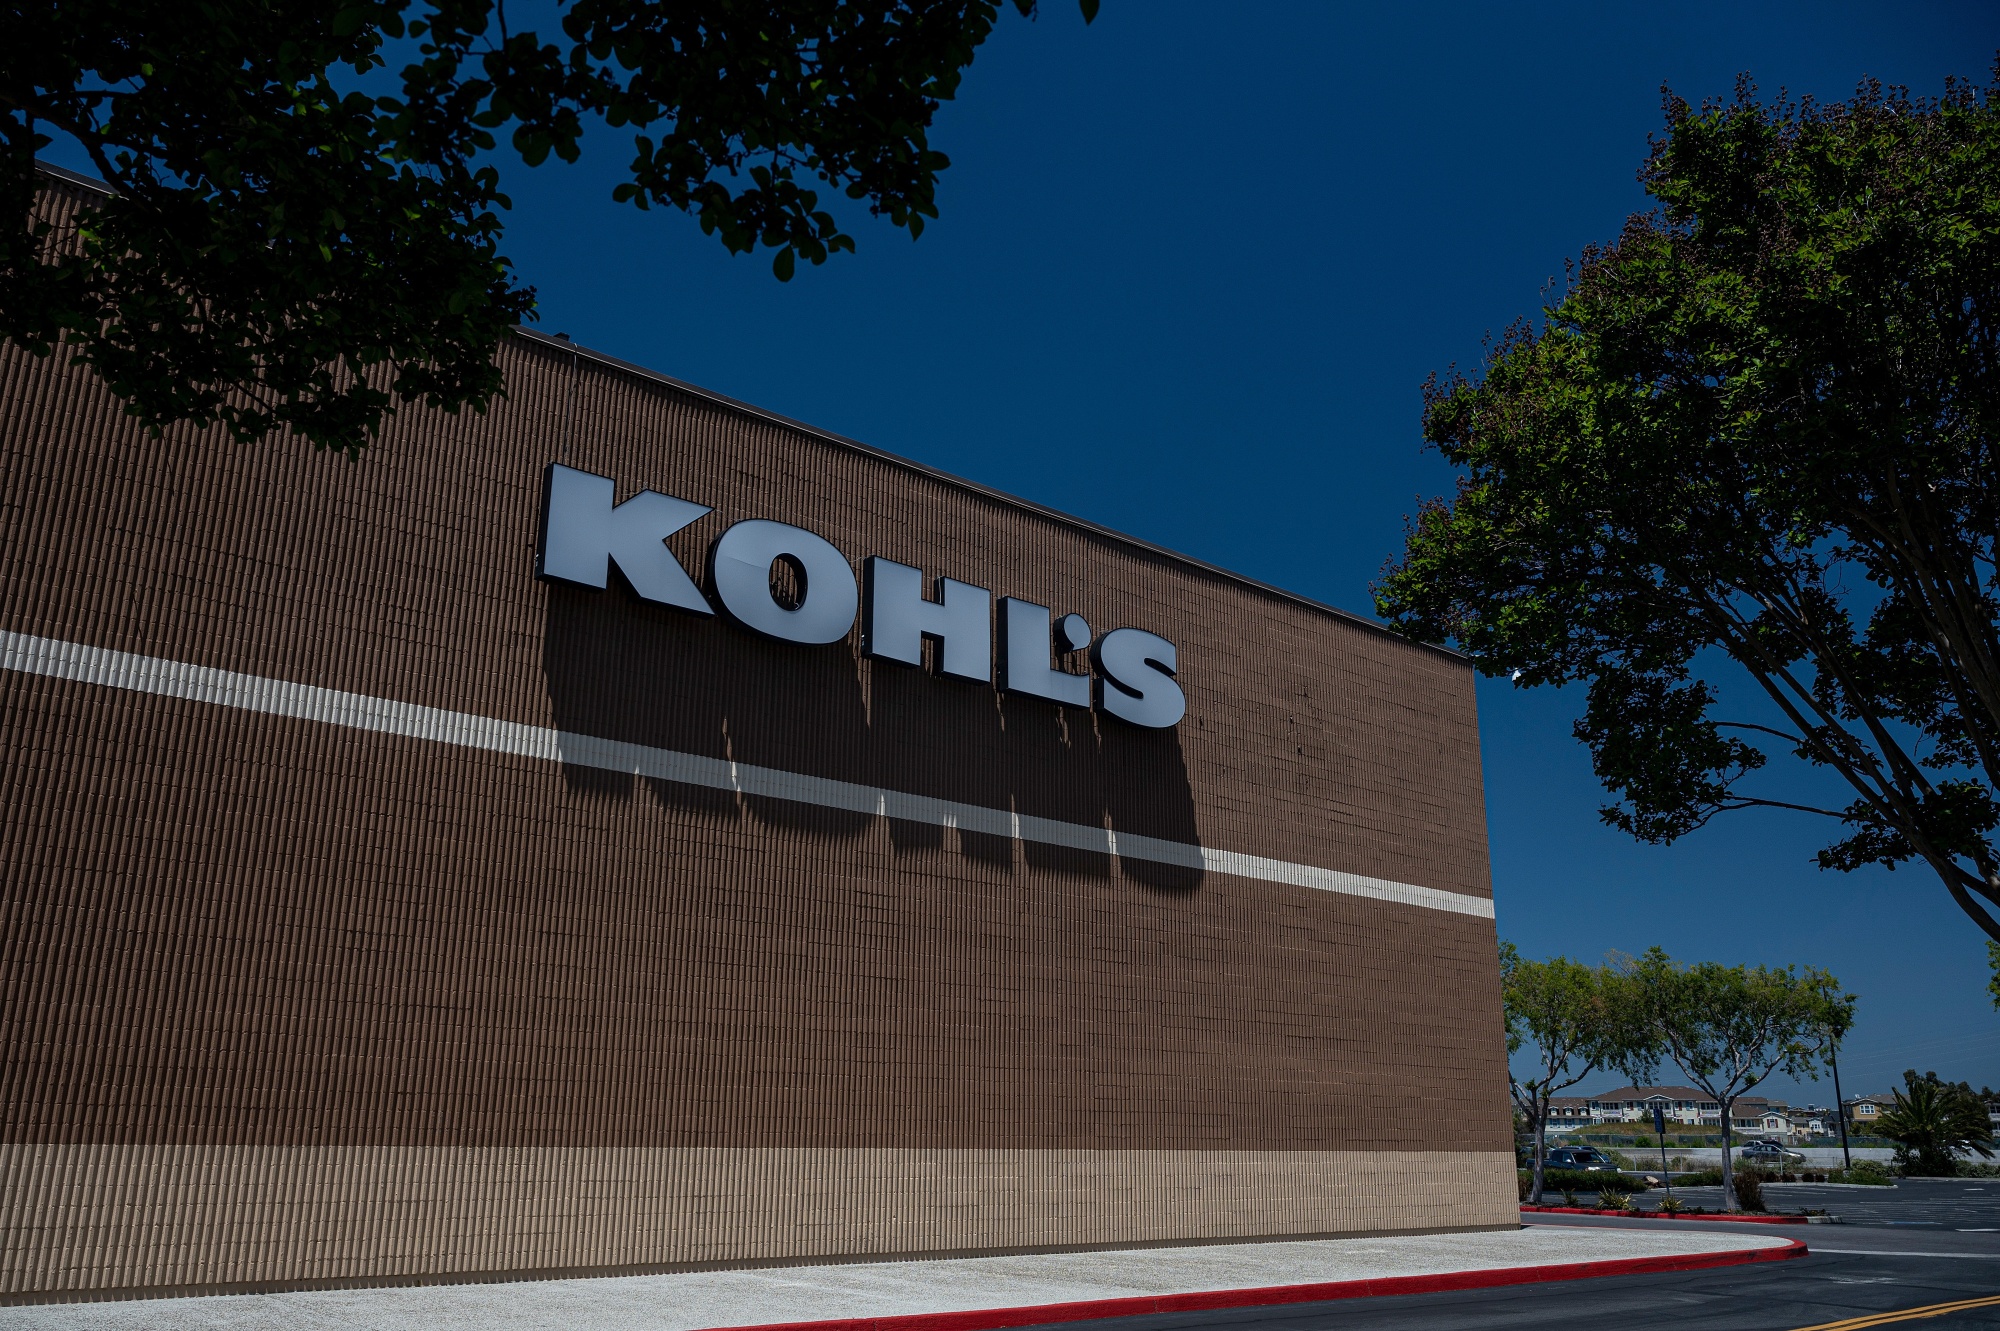 Customers returning  purchases at Kohl's speak about its